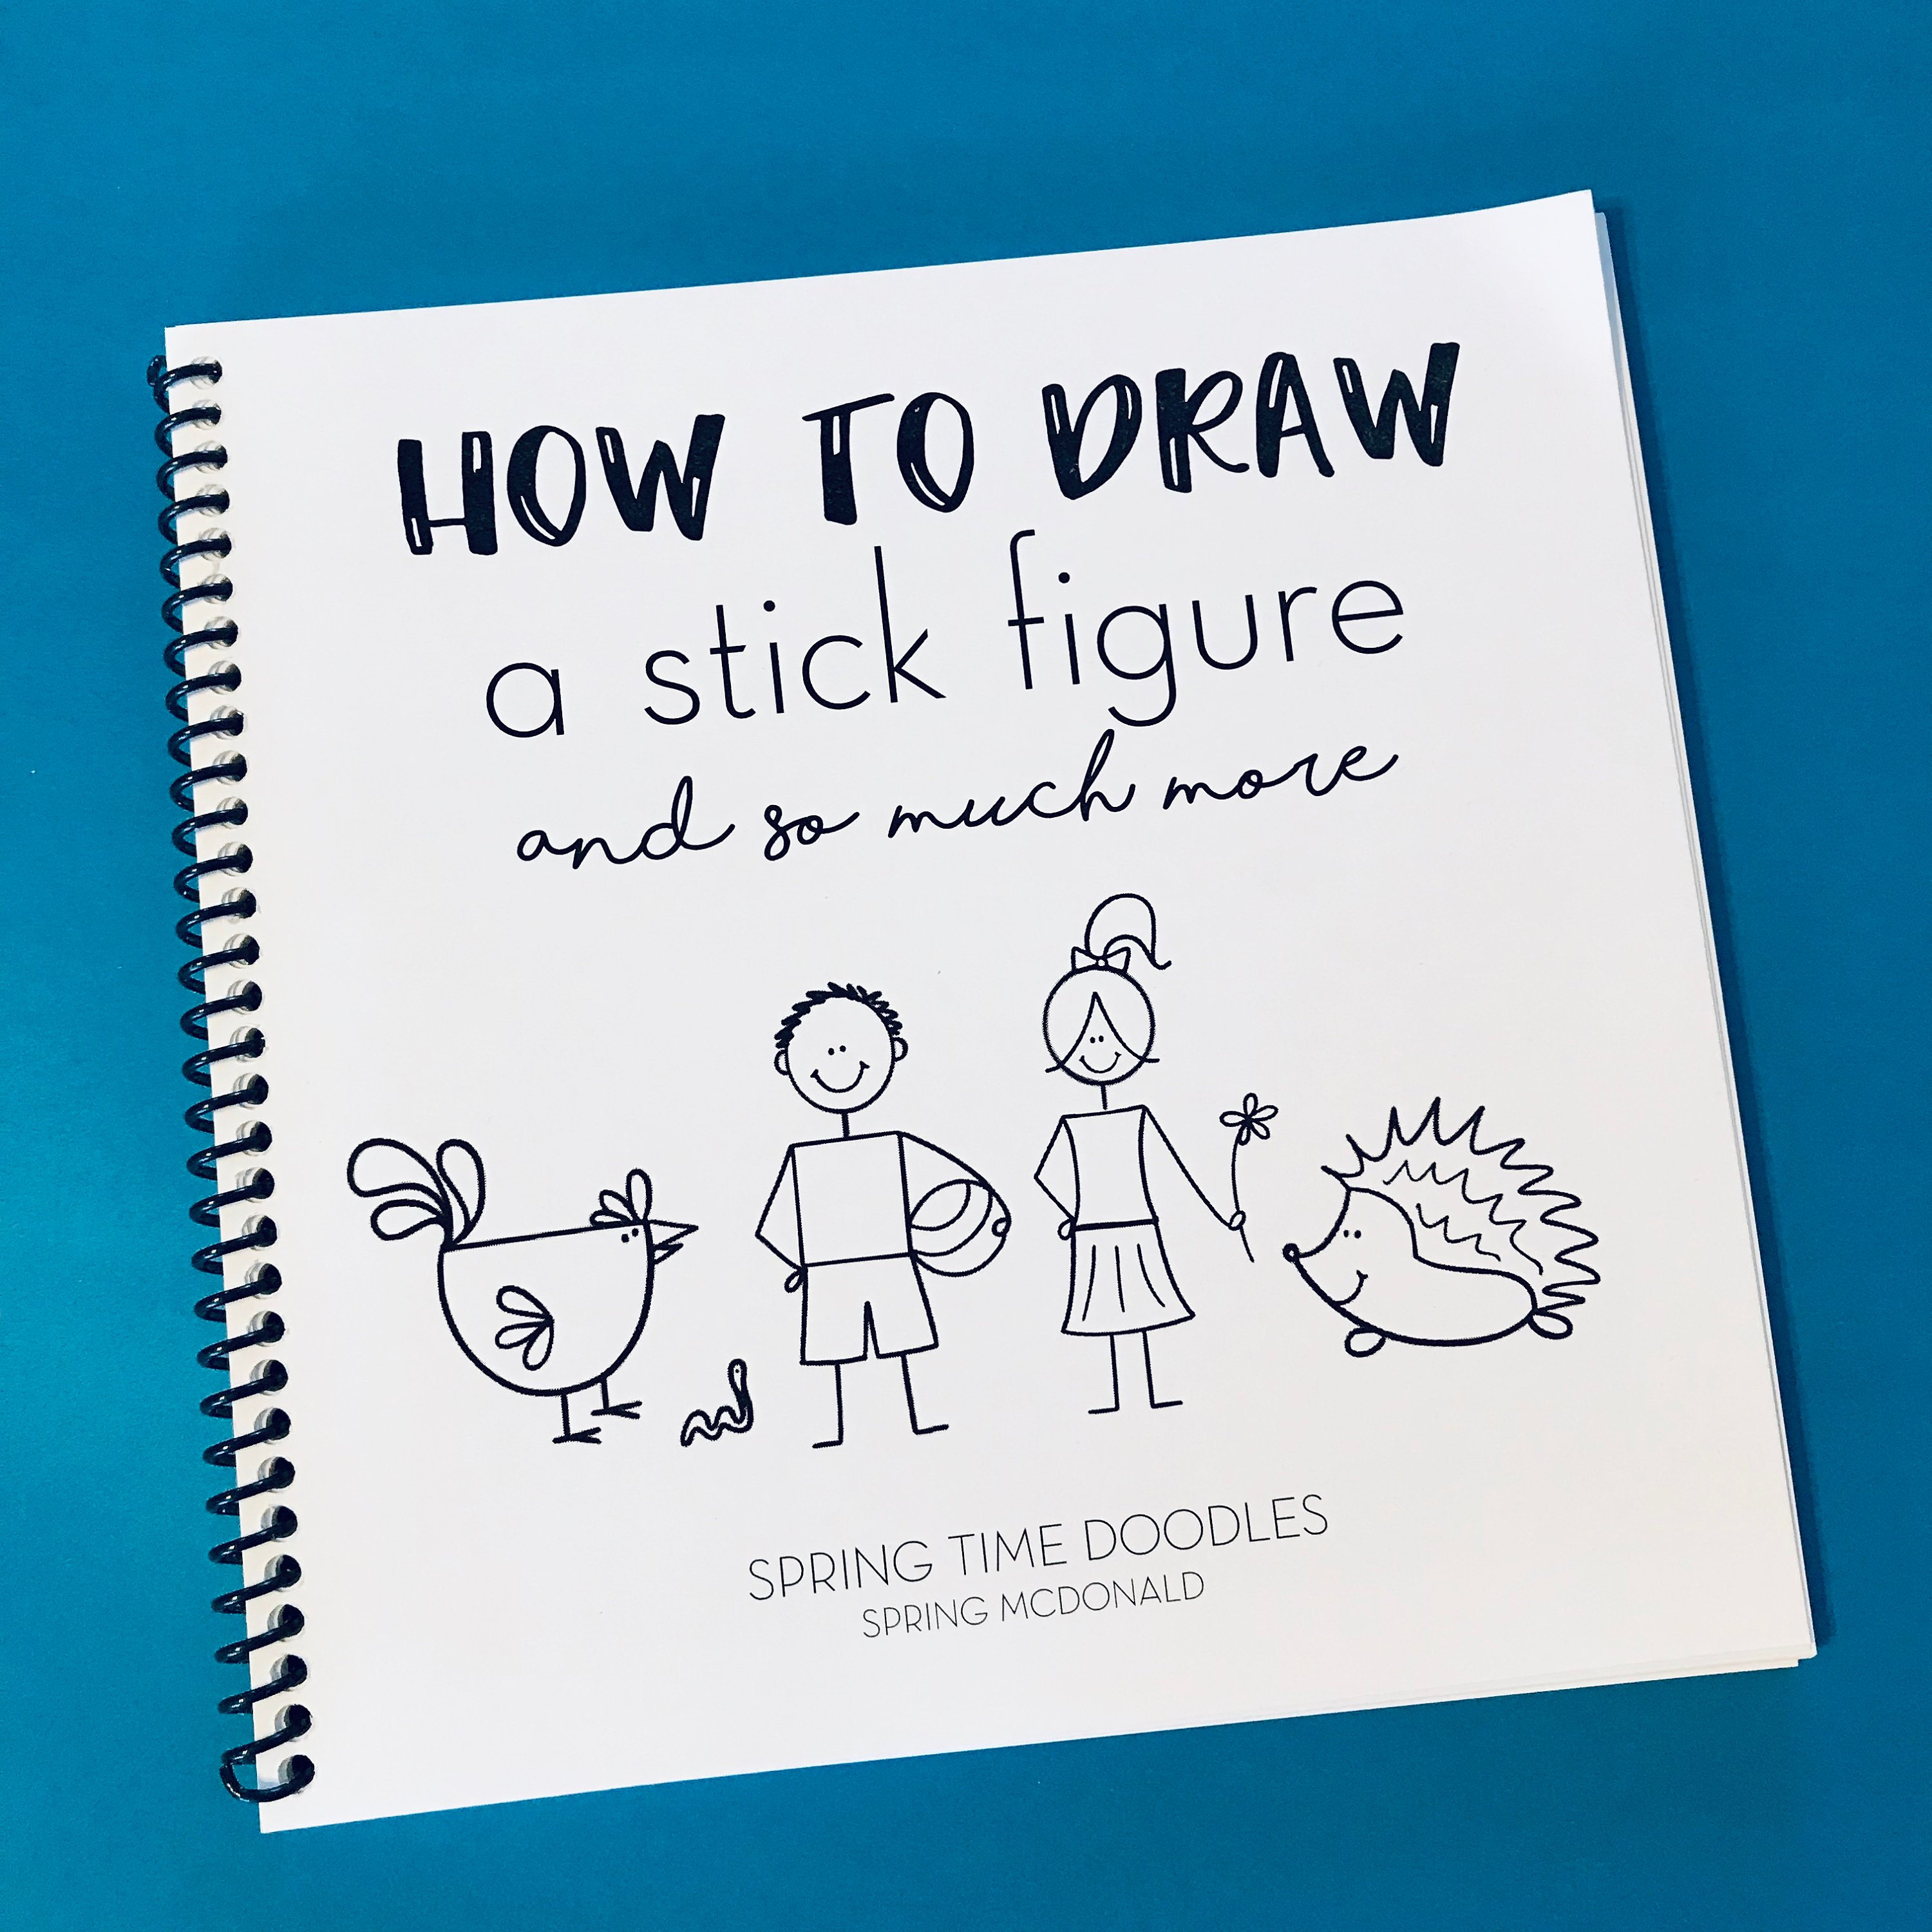 How To Draw a Stick Figure 